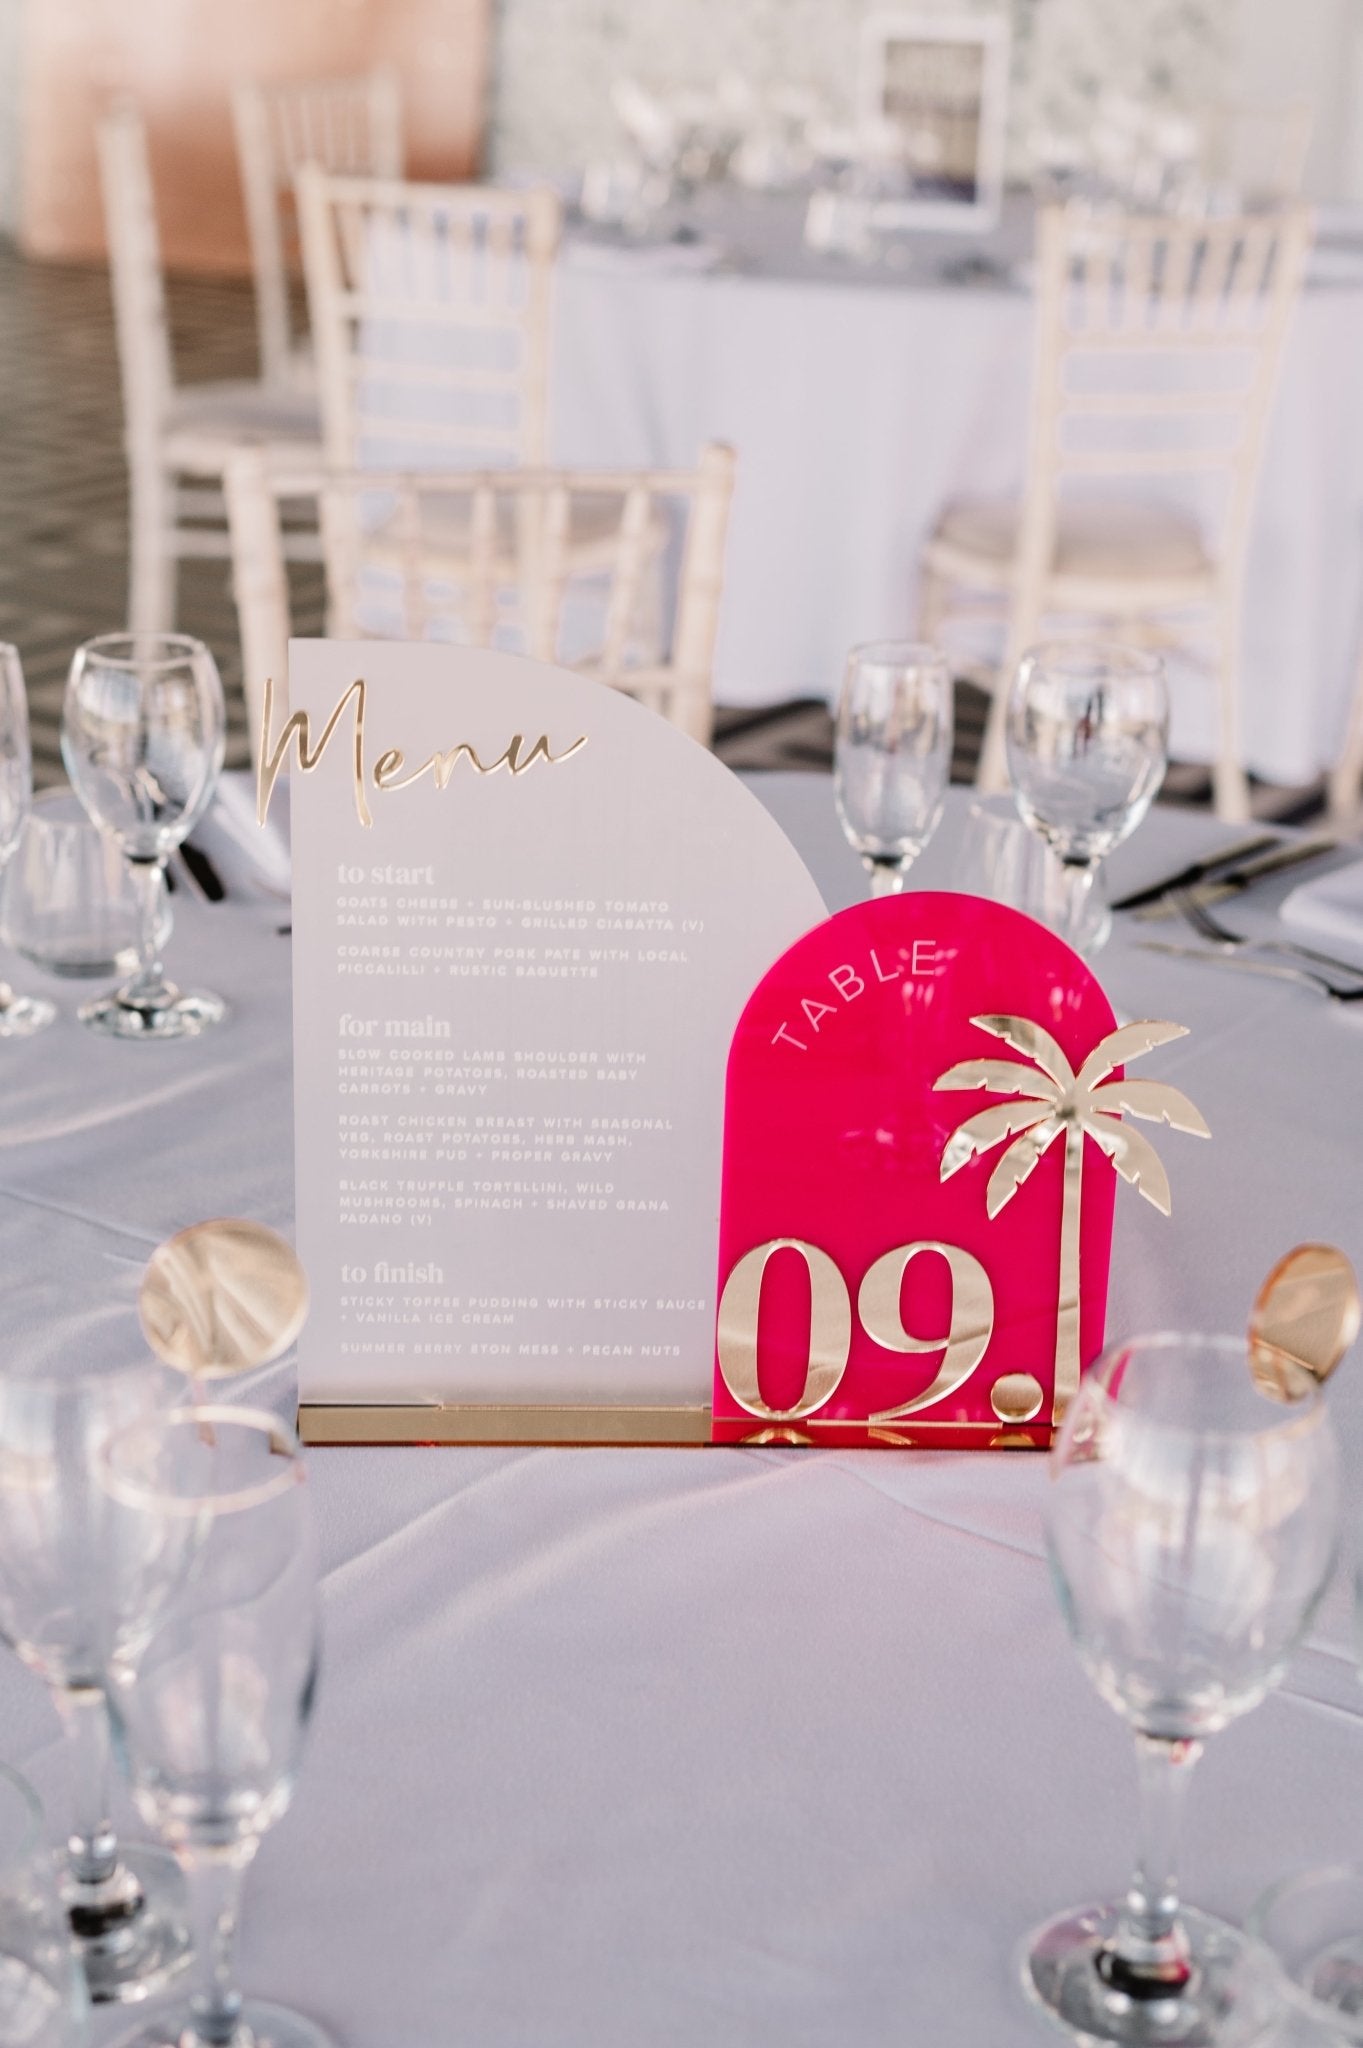 Wedding menu sign with table number